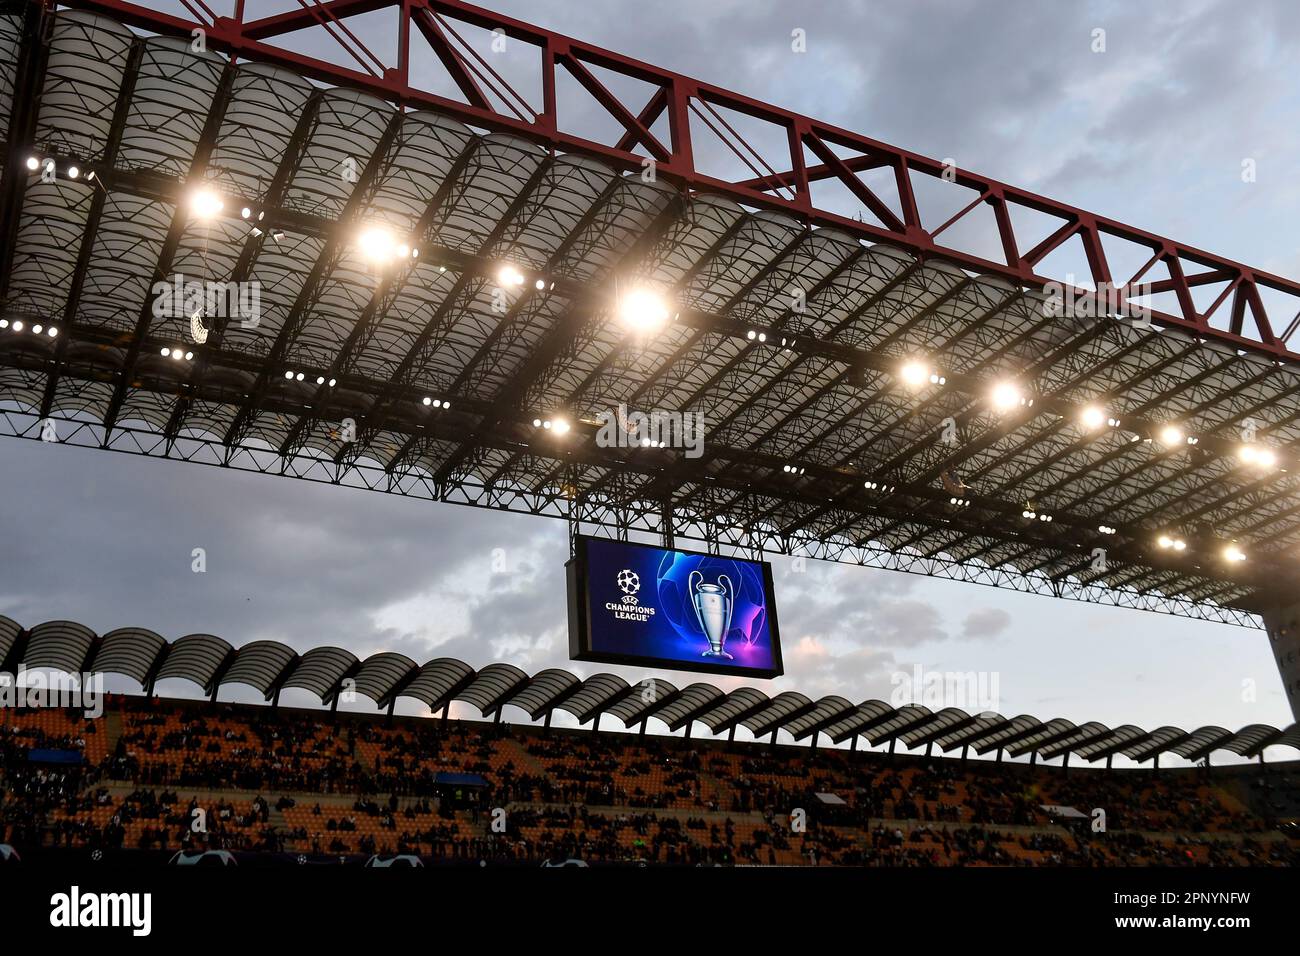 The champions league logo and trophy are displayed on the scoreboard during the Champions League football match between FC Internazionale and SL Benfi Stock Photo